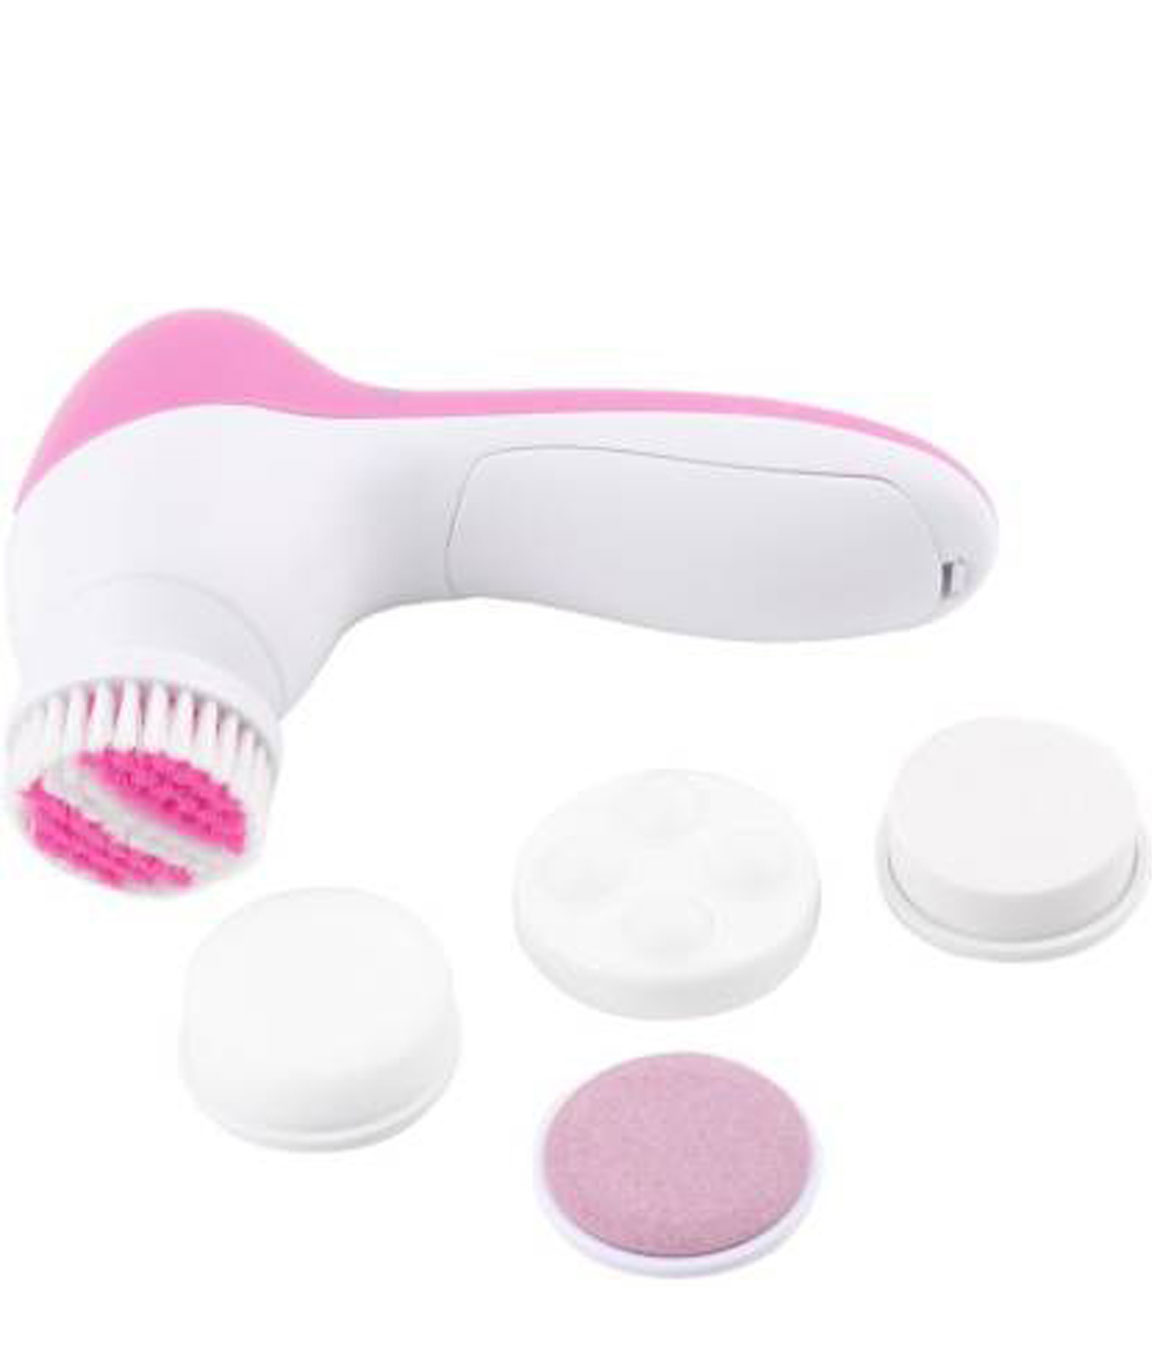 ELECTRIC MACHINE KIT FOR SMOOTHING FACE MASSAGER (WHITE, PINK)